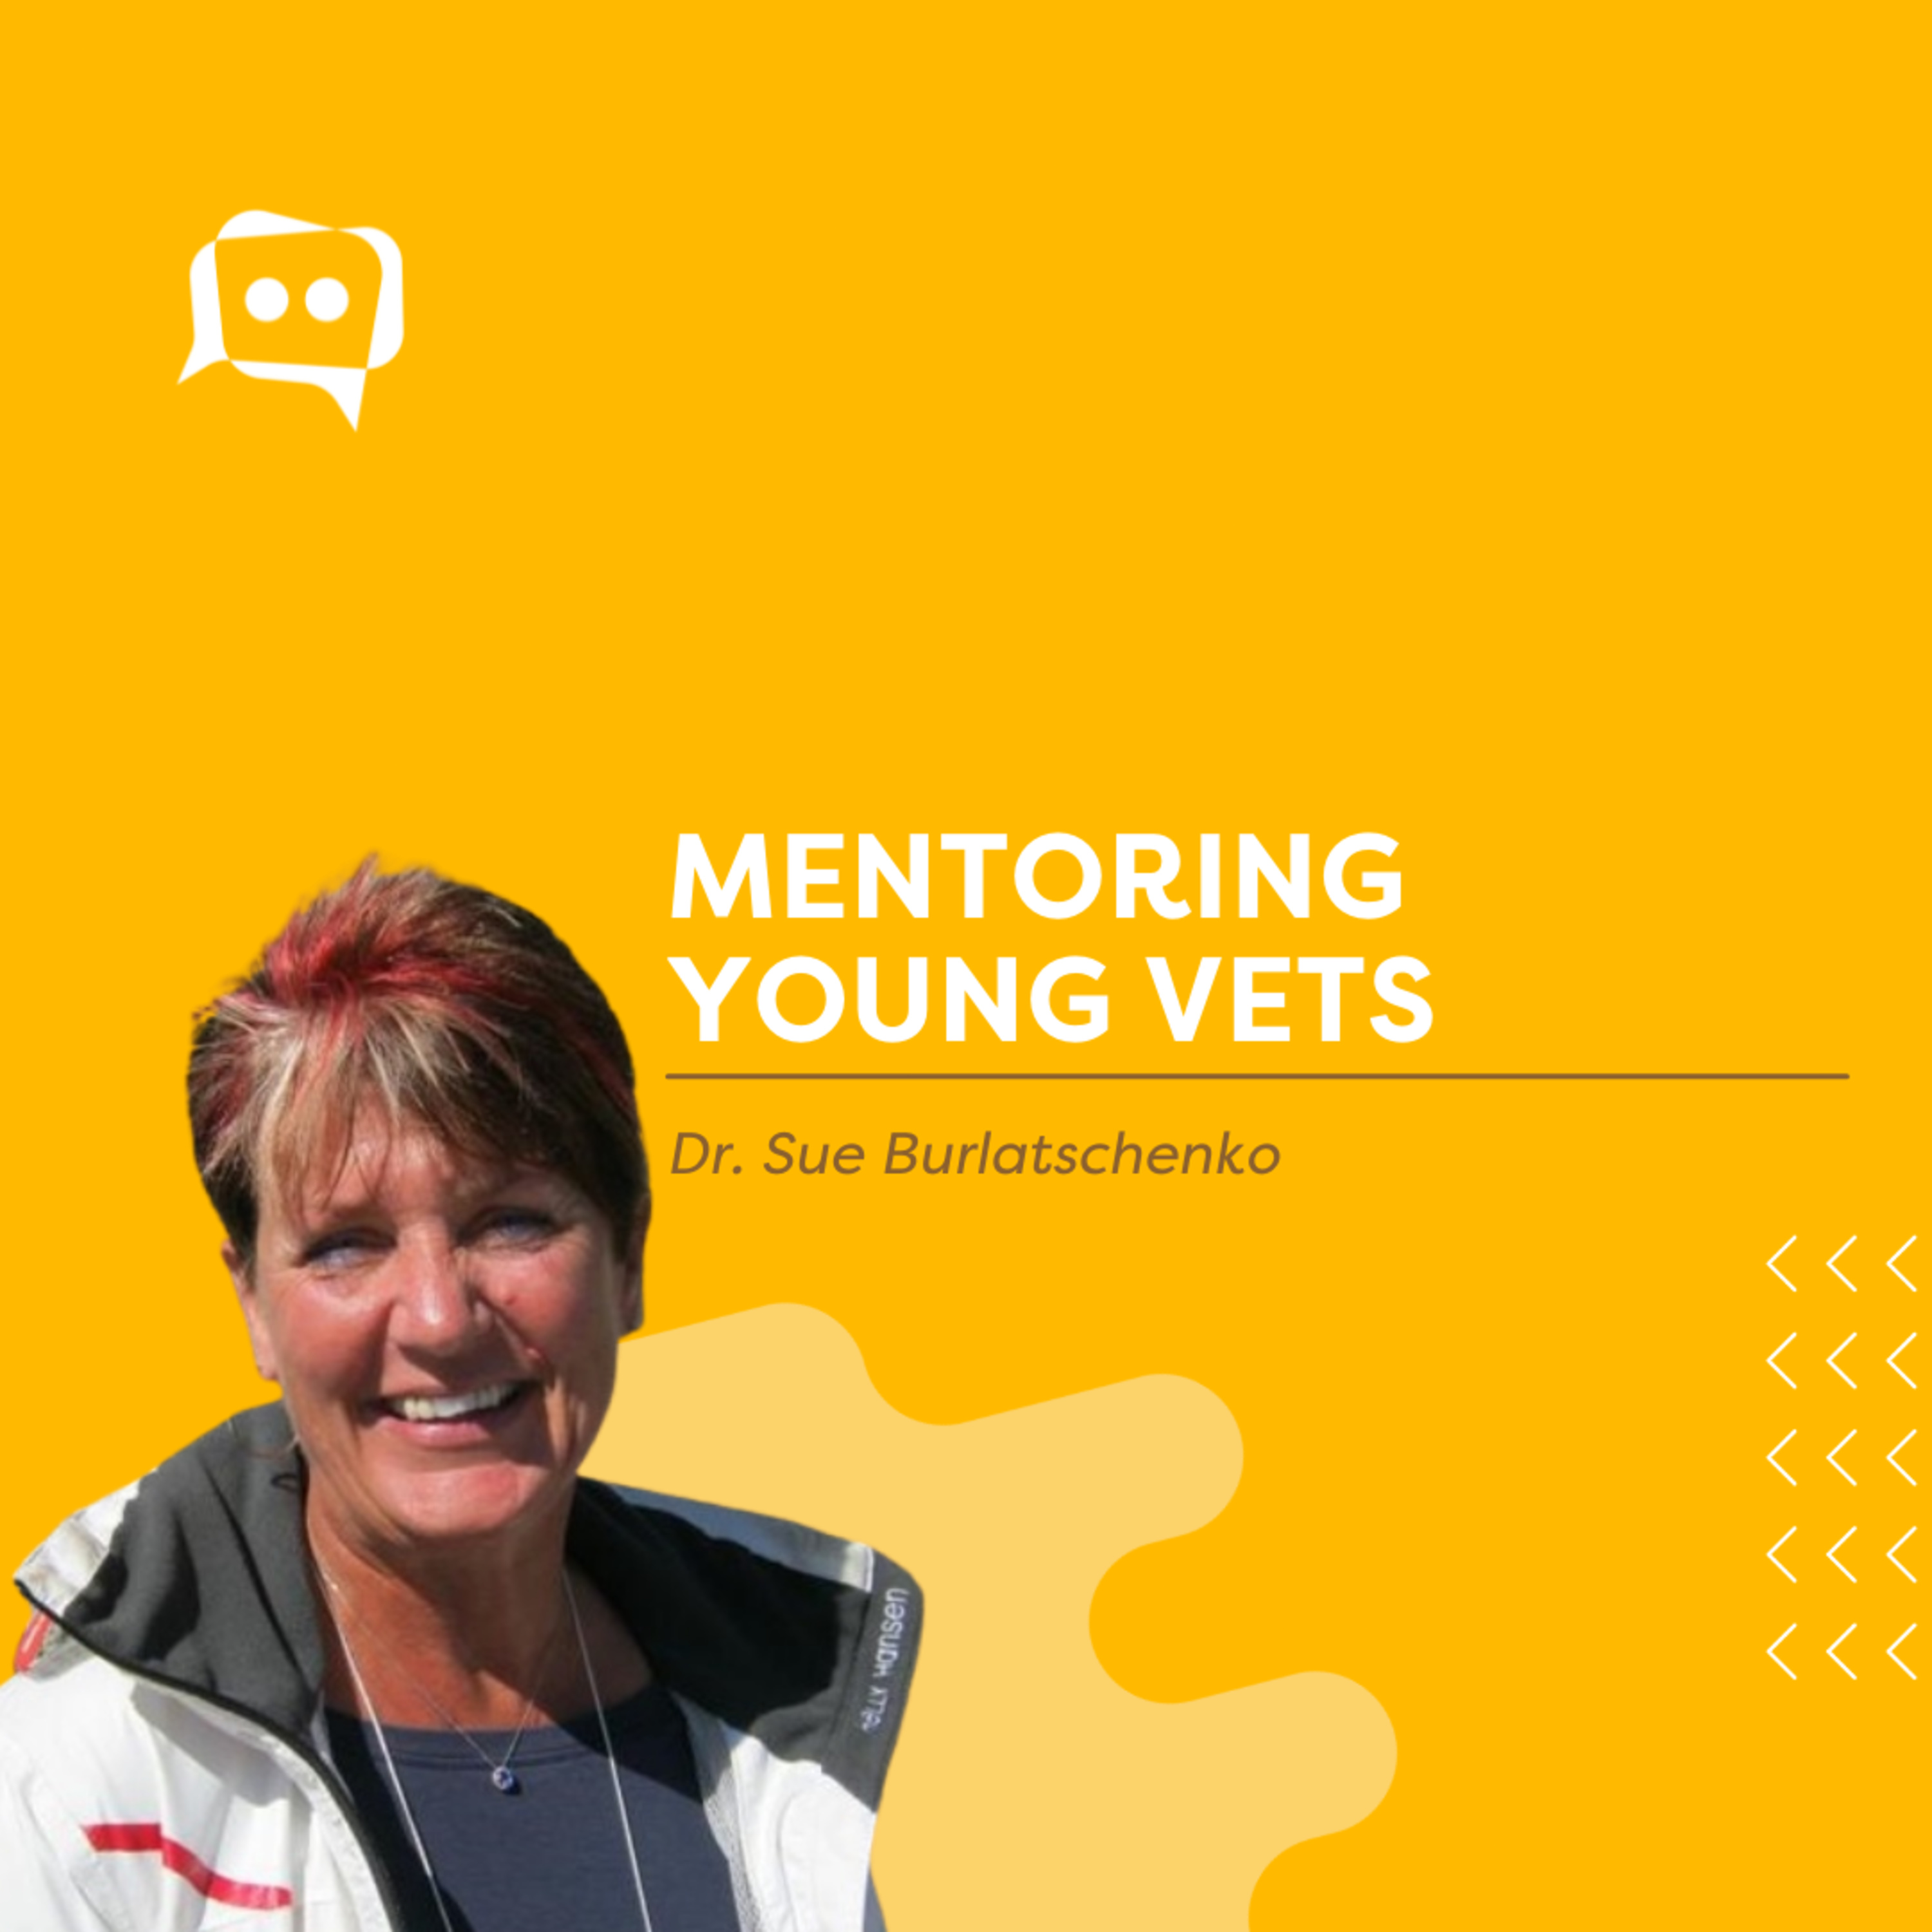 #SHORTS: Mentoring young vets, with Dr. Sue Burlatschenko